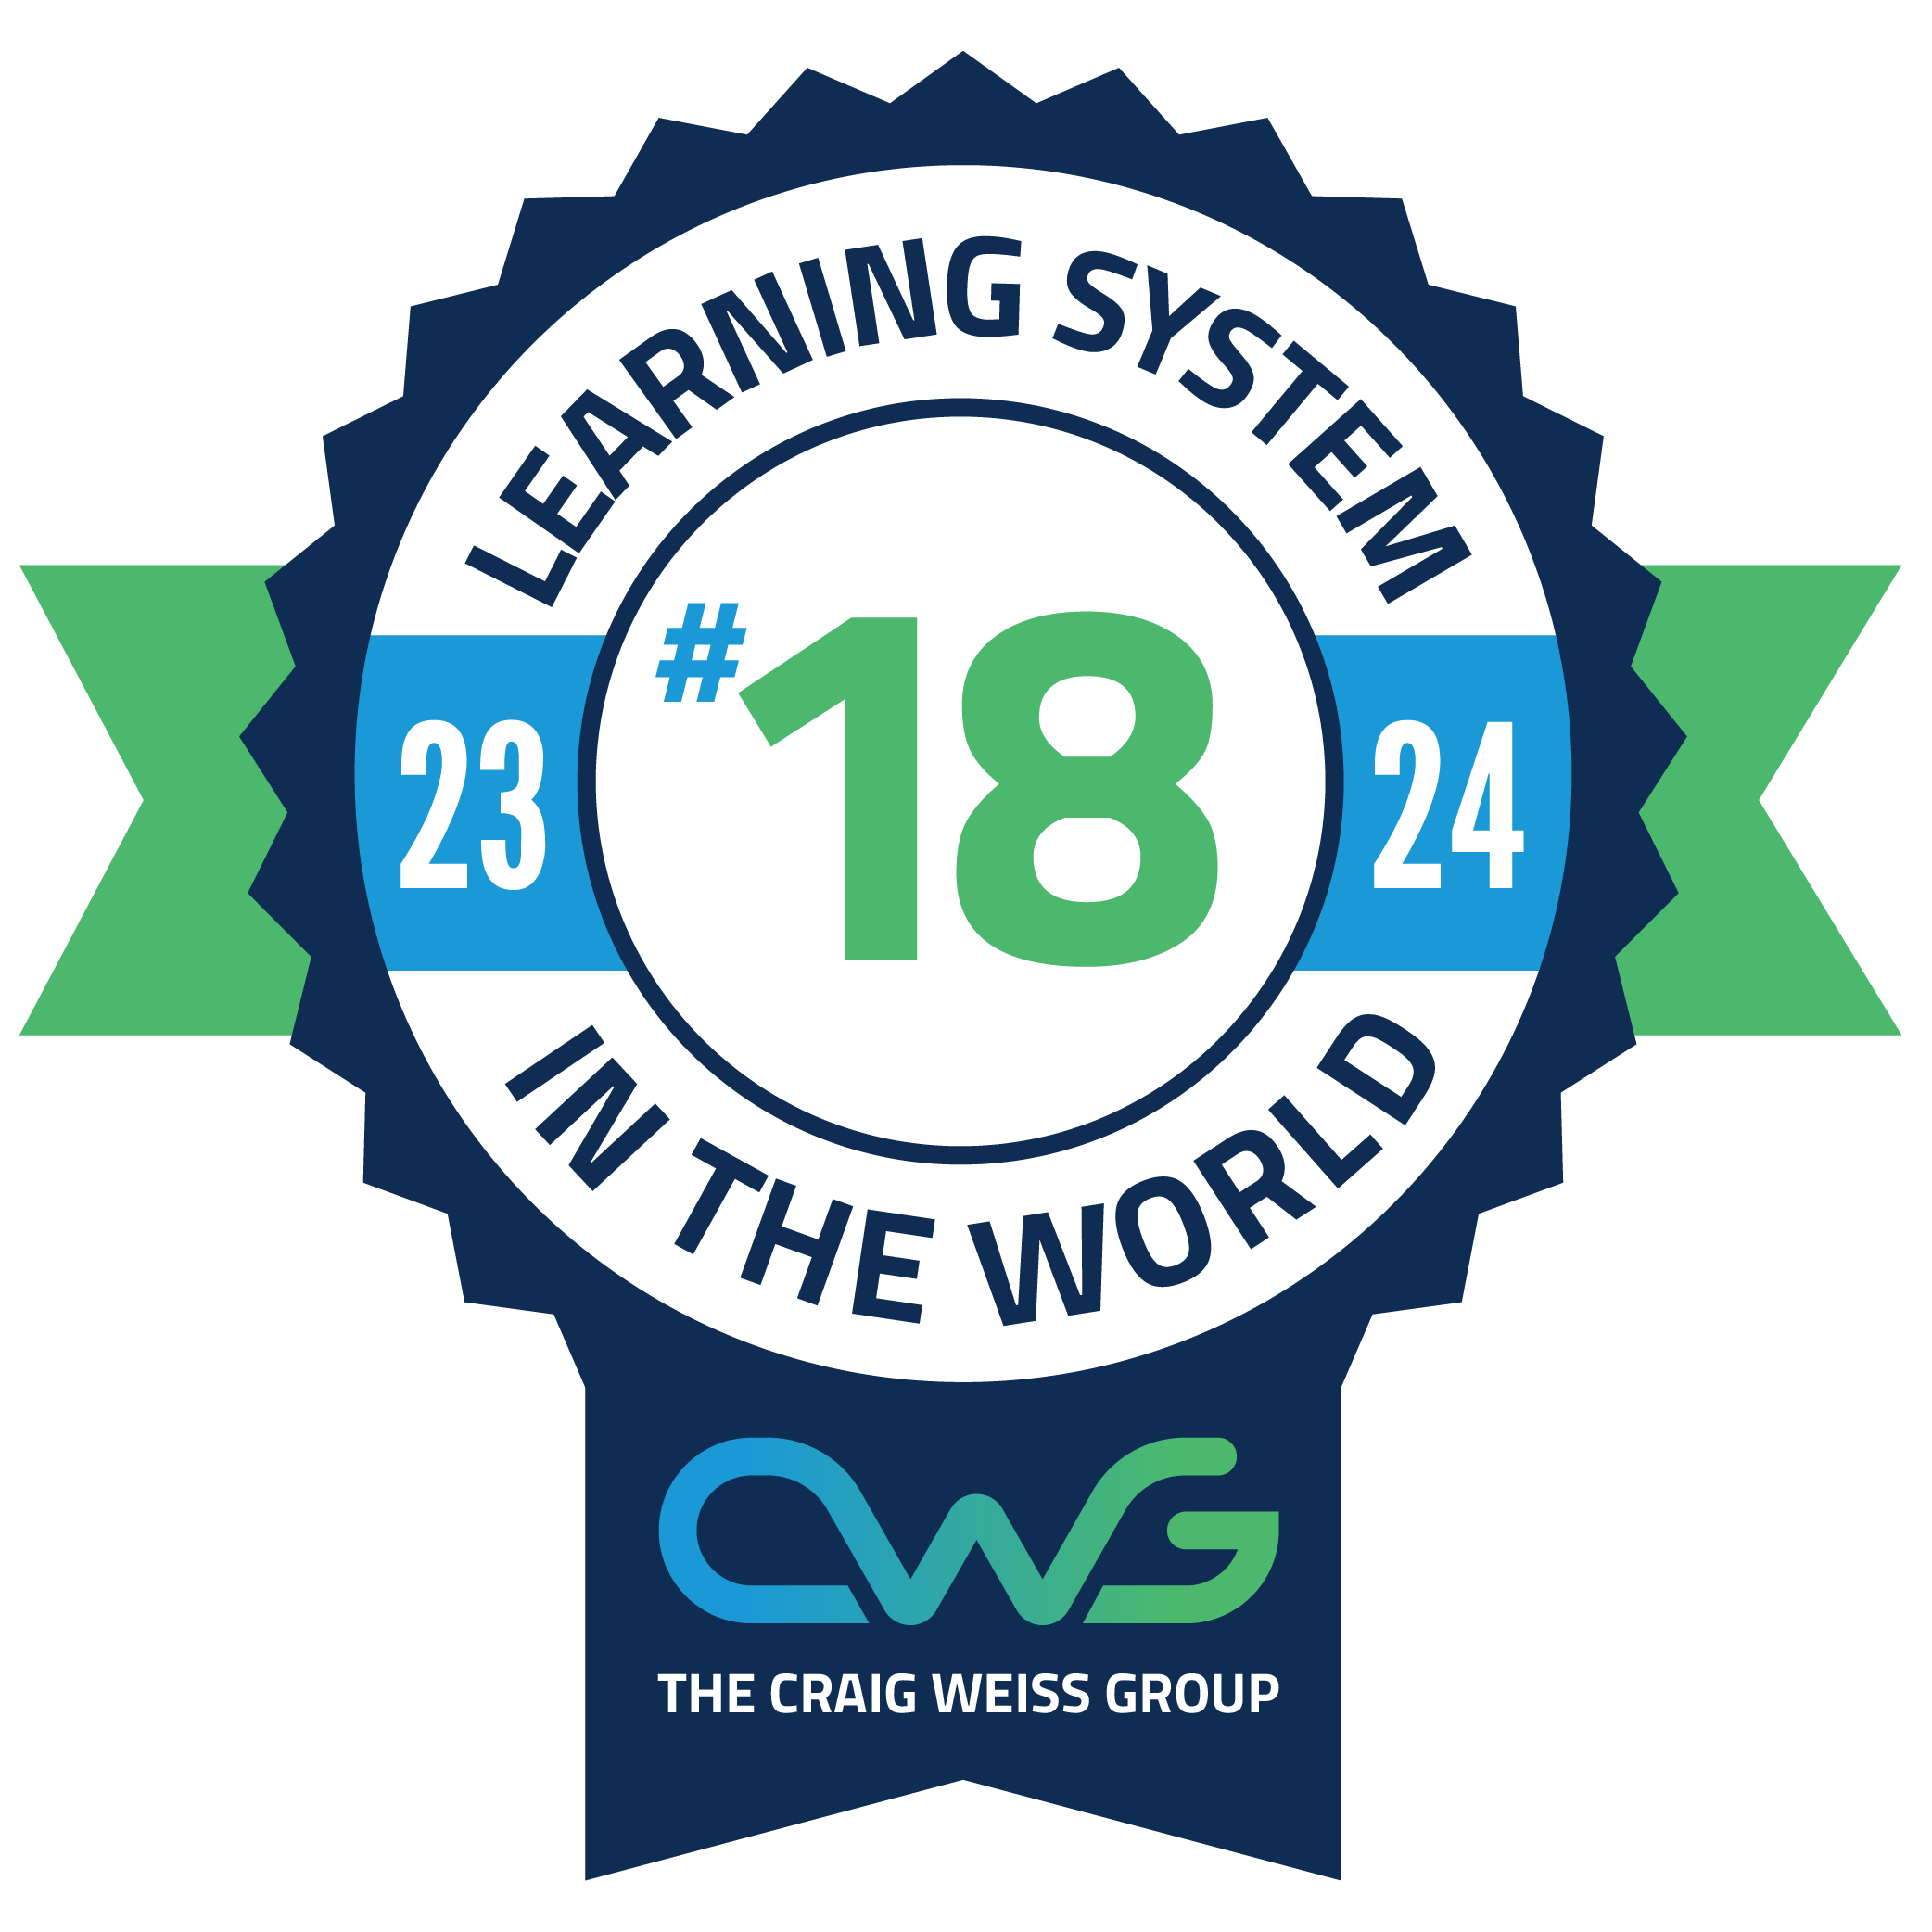 GyrusAim LMS Earns Prestigious Recognition as a Top 20 Learning Management System by Industry Expert Craig Weiss